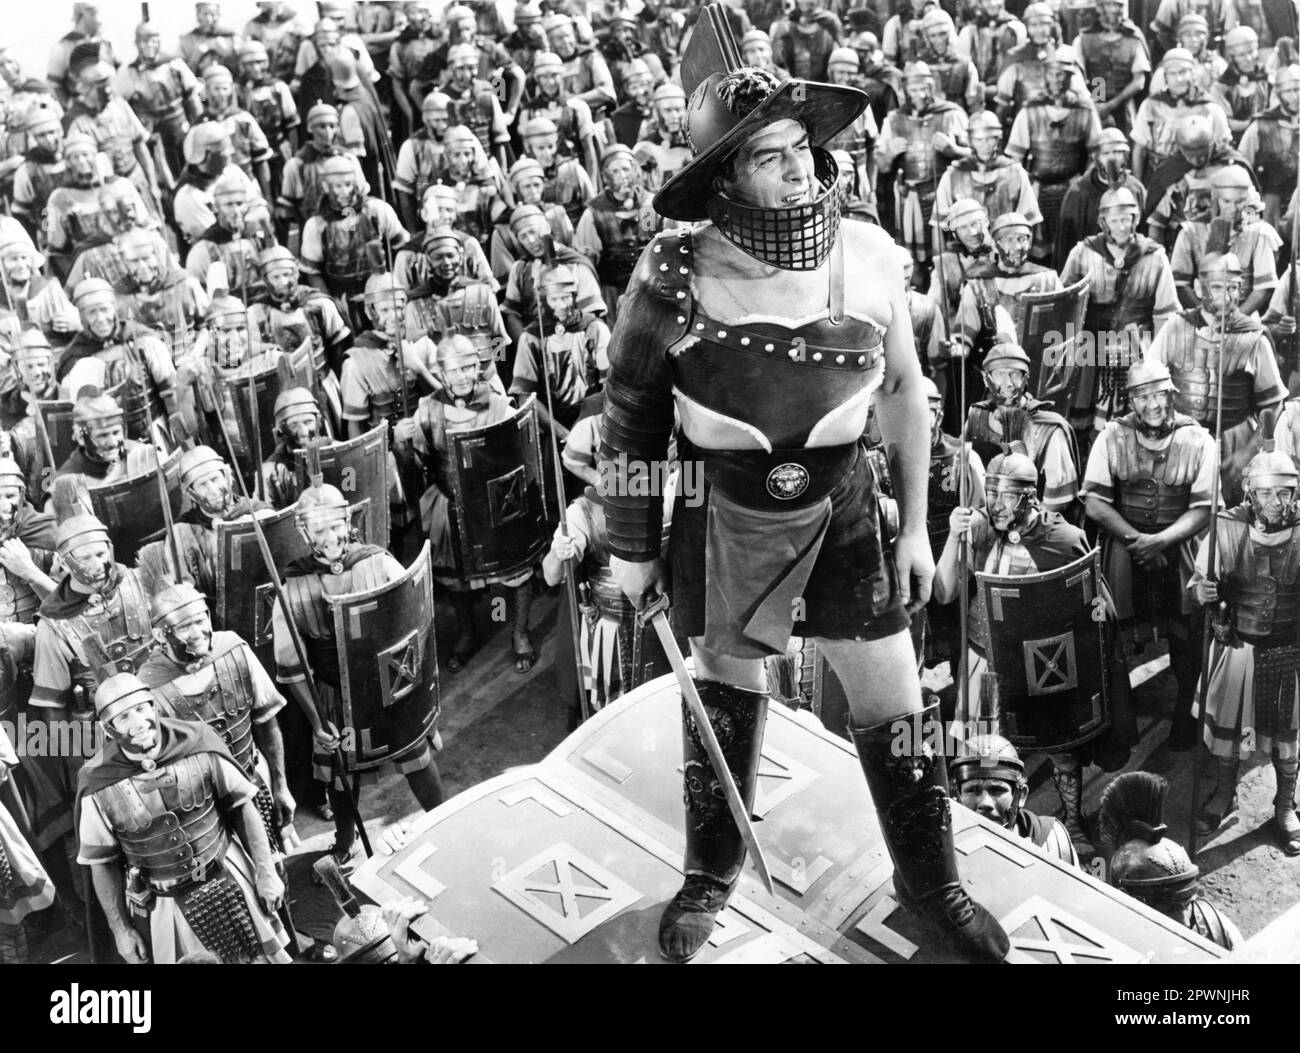 VICTOR MATURE in DEMETRIUS AND THE GLADIATORS 1954 director DELMER DAVES based on a character created by Lloyd C. Douglas in The Robe written by Philip Dunne music Franz Waxman producer Frank Ross Twentieth Century Fox Stock Photo